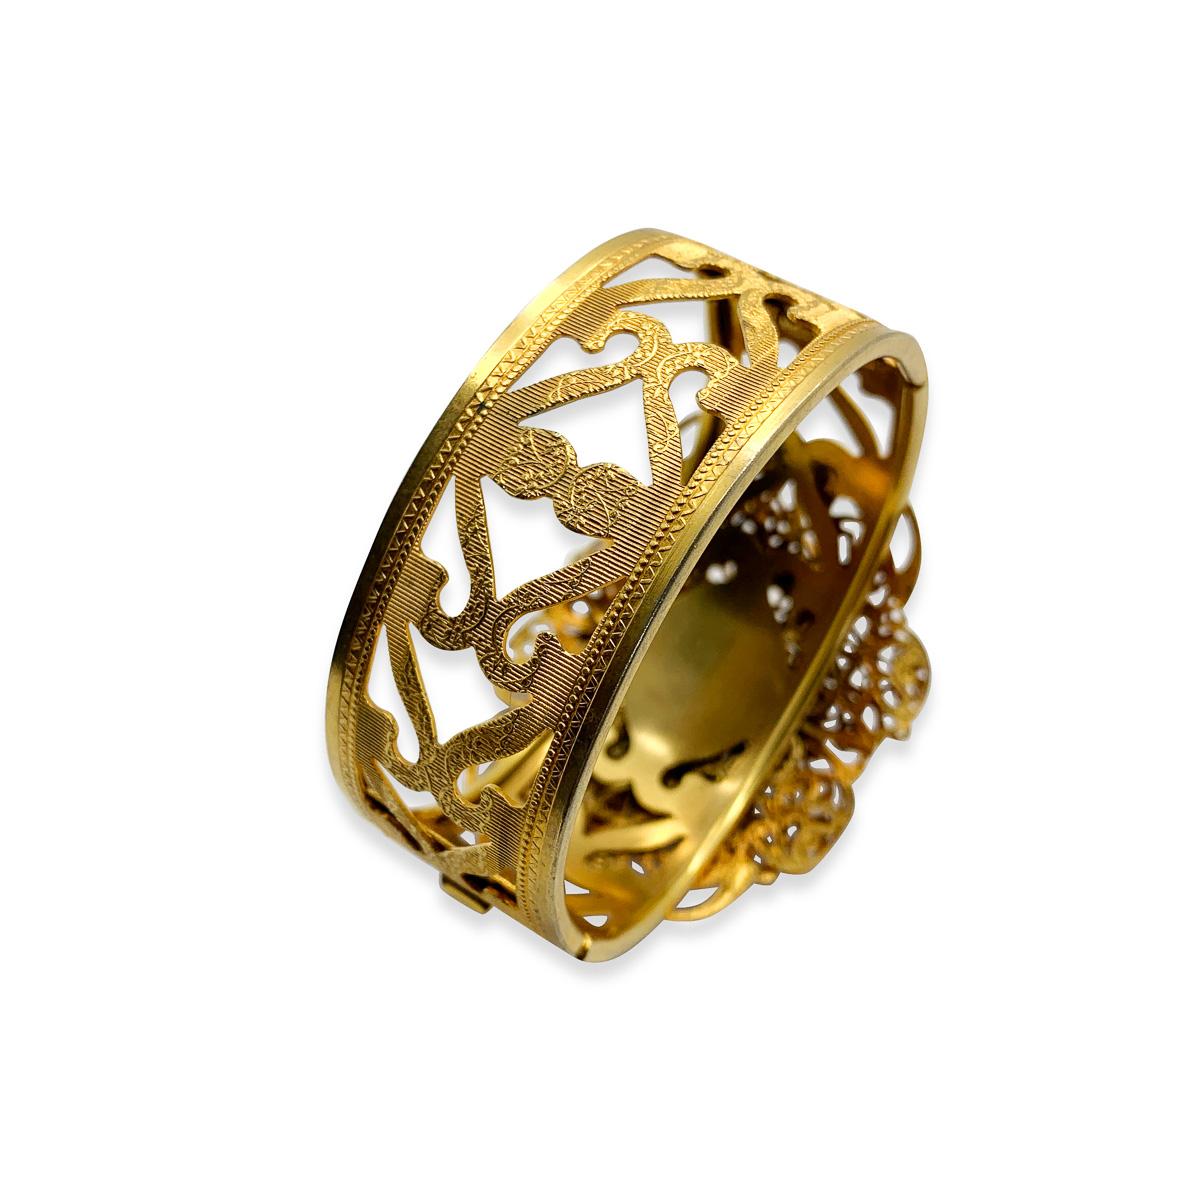 A Vintage Czech Filigree Cuff. Featuring a broad cuff design incorporating fabulous detail with fancy fretwork, delicate engraving and the classic filigree work to the front.
Vintage Condition: Very good without damage or noteworthy wear.
Materials: